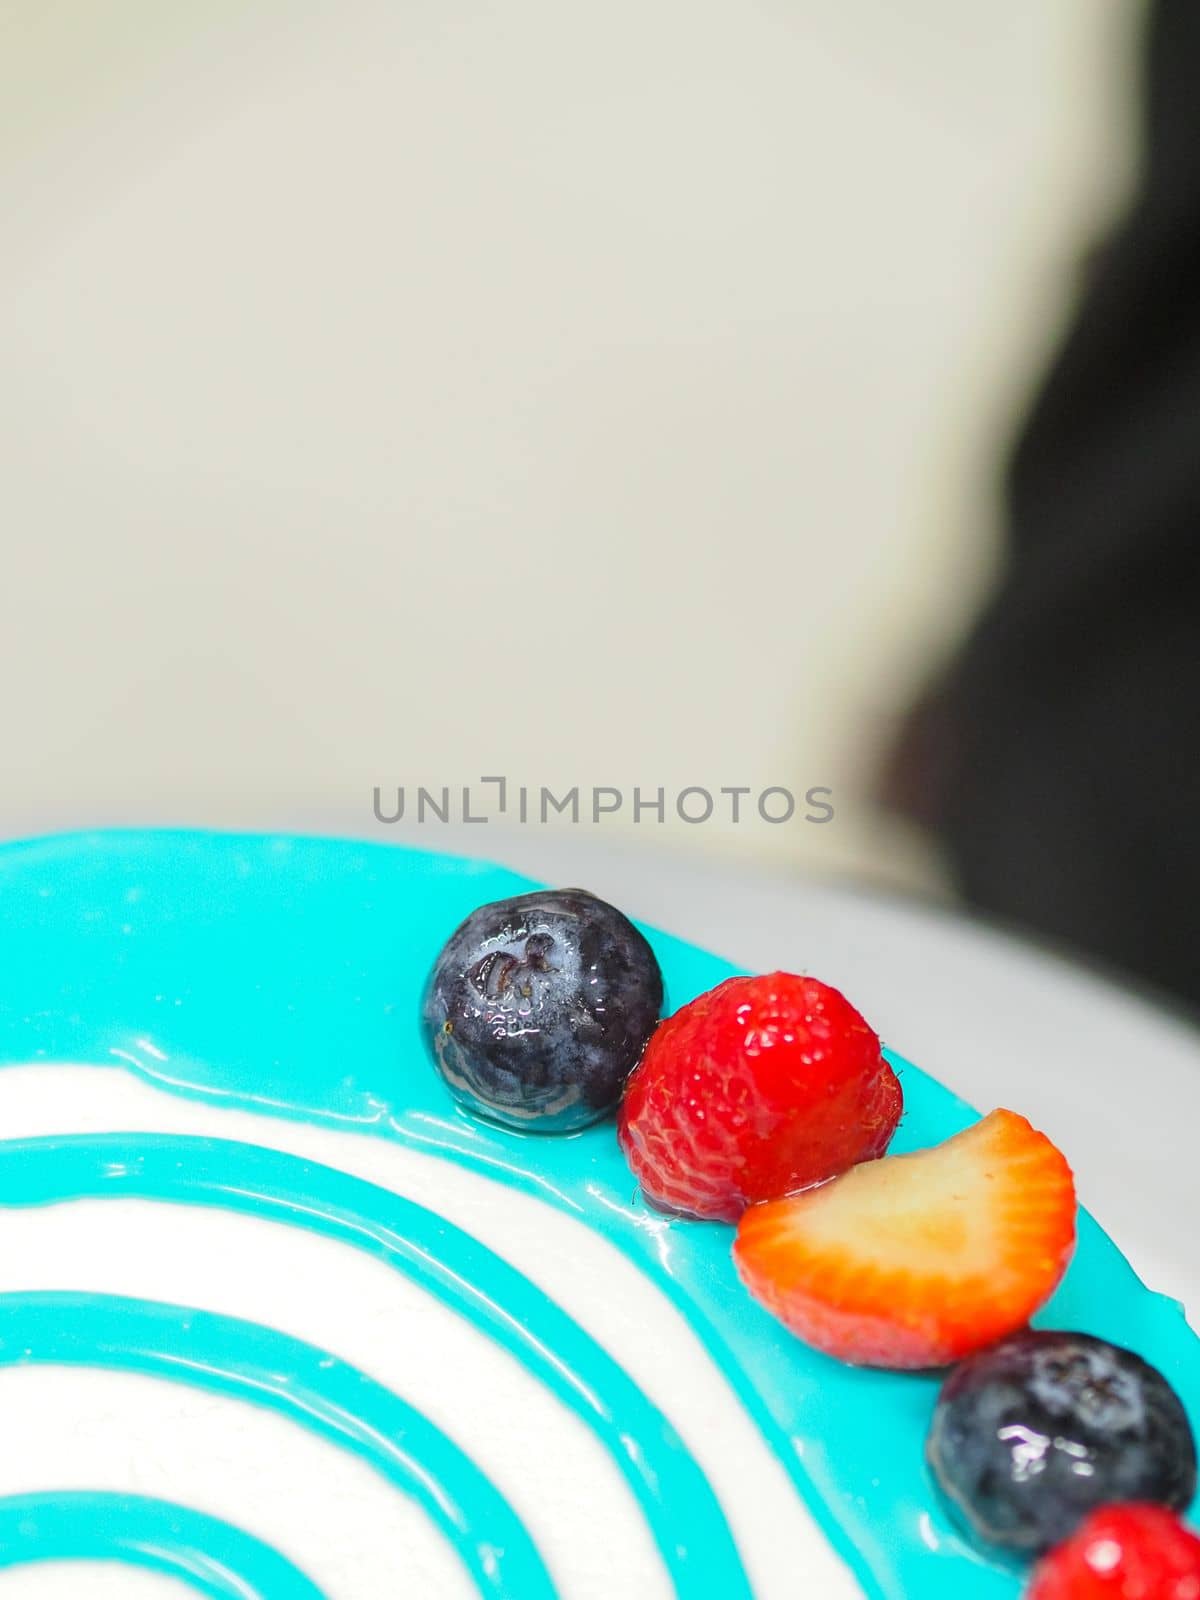 hand pastry chef designer topping a frosted white cake with pastel light blue drip filling bag by verbano